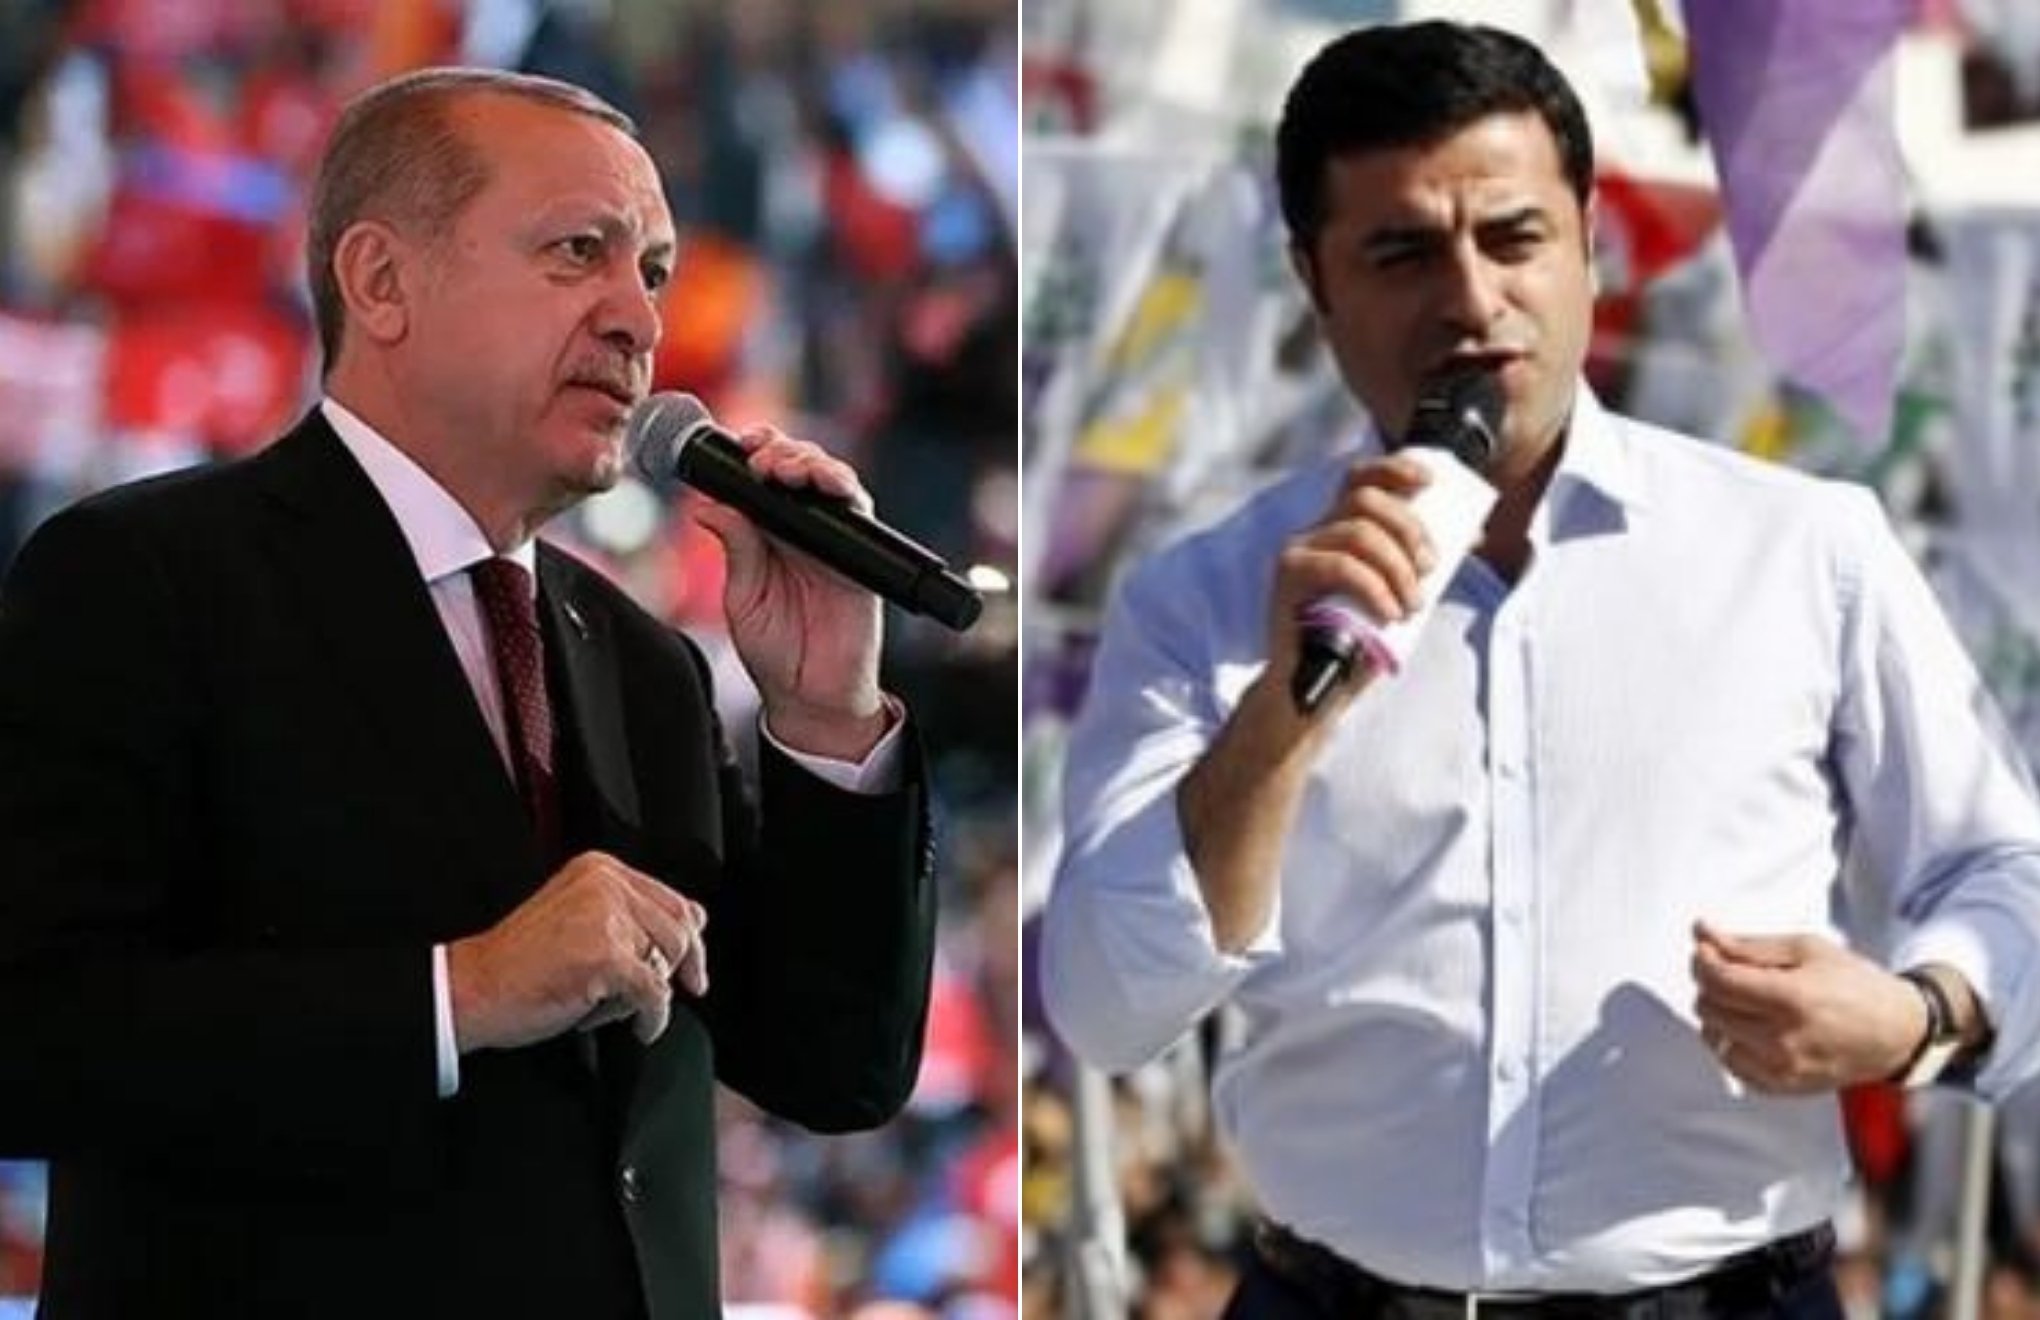 ‘Are you in?’: Demirtaş responds to Erdoğan’s ‘rally’ remarks